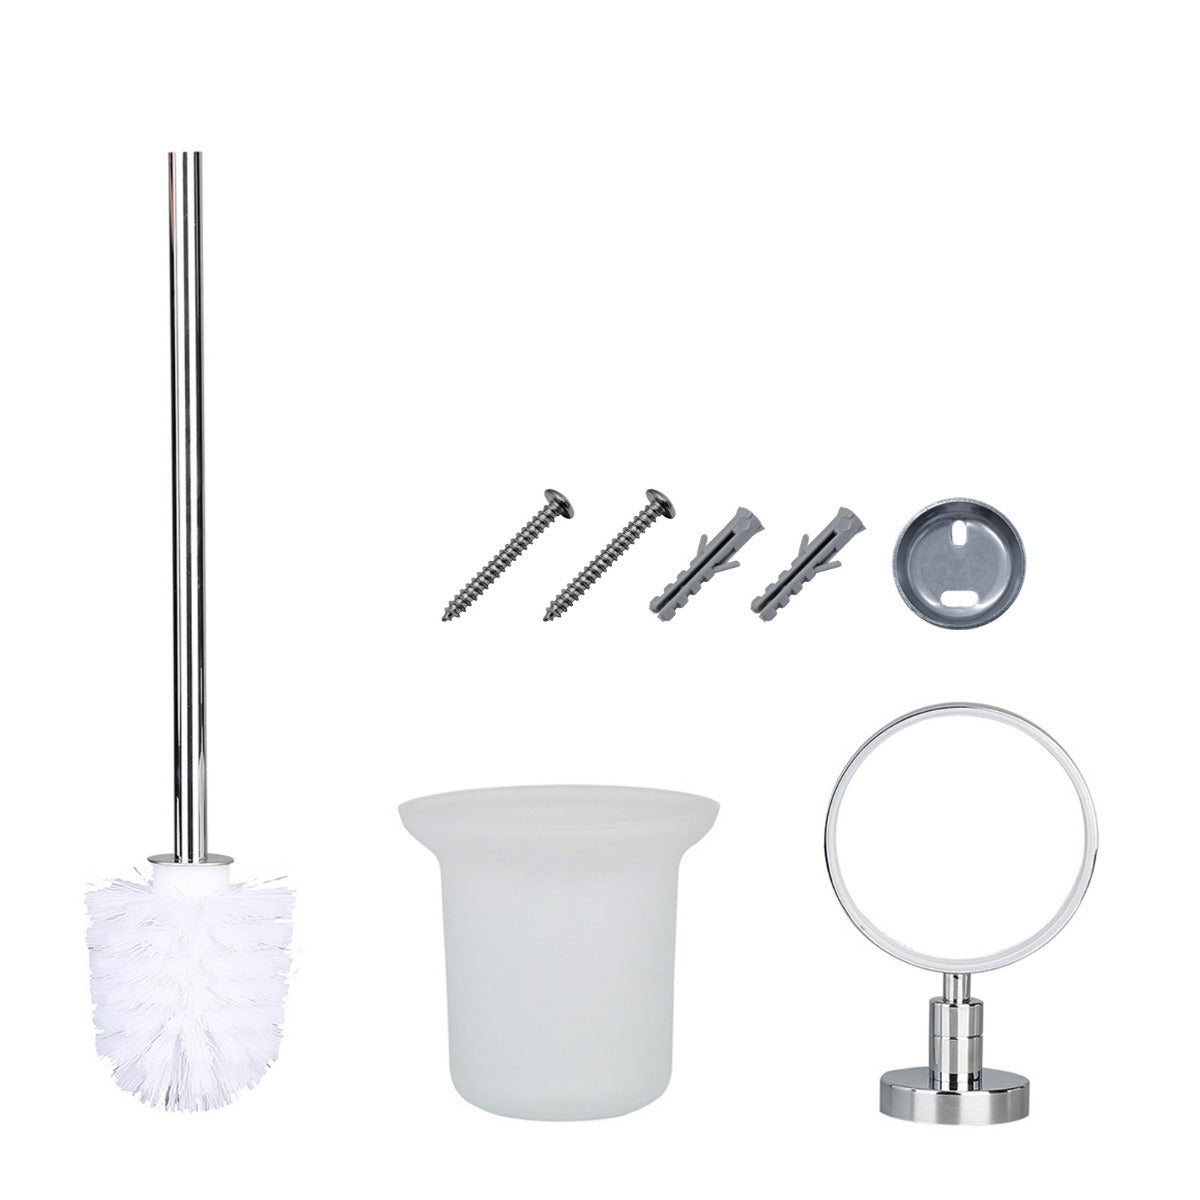 JassferryJASSFERRY Westminster Toilet Brush and Holder Wall Mounted Frosted Glass TumbleBathroom Accessories